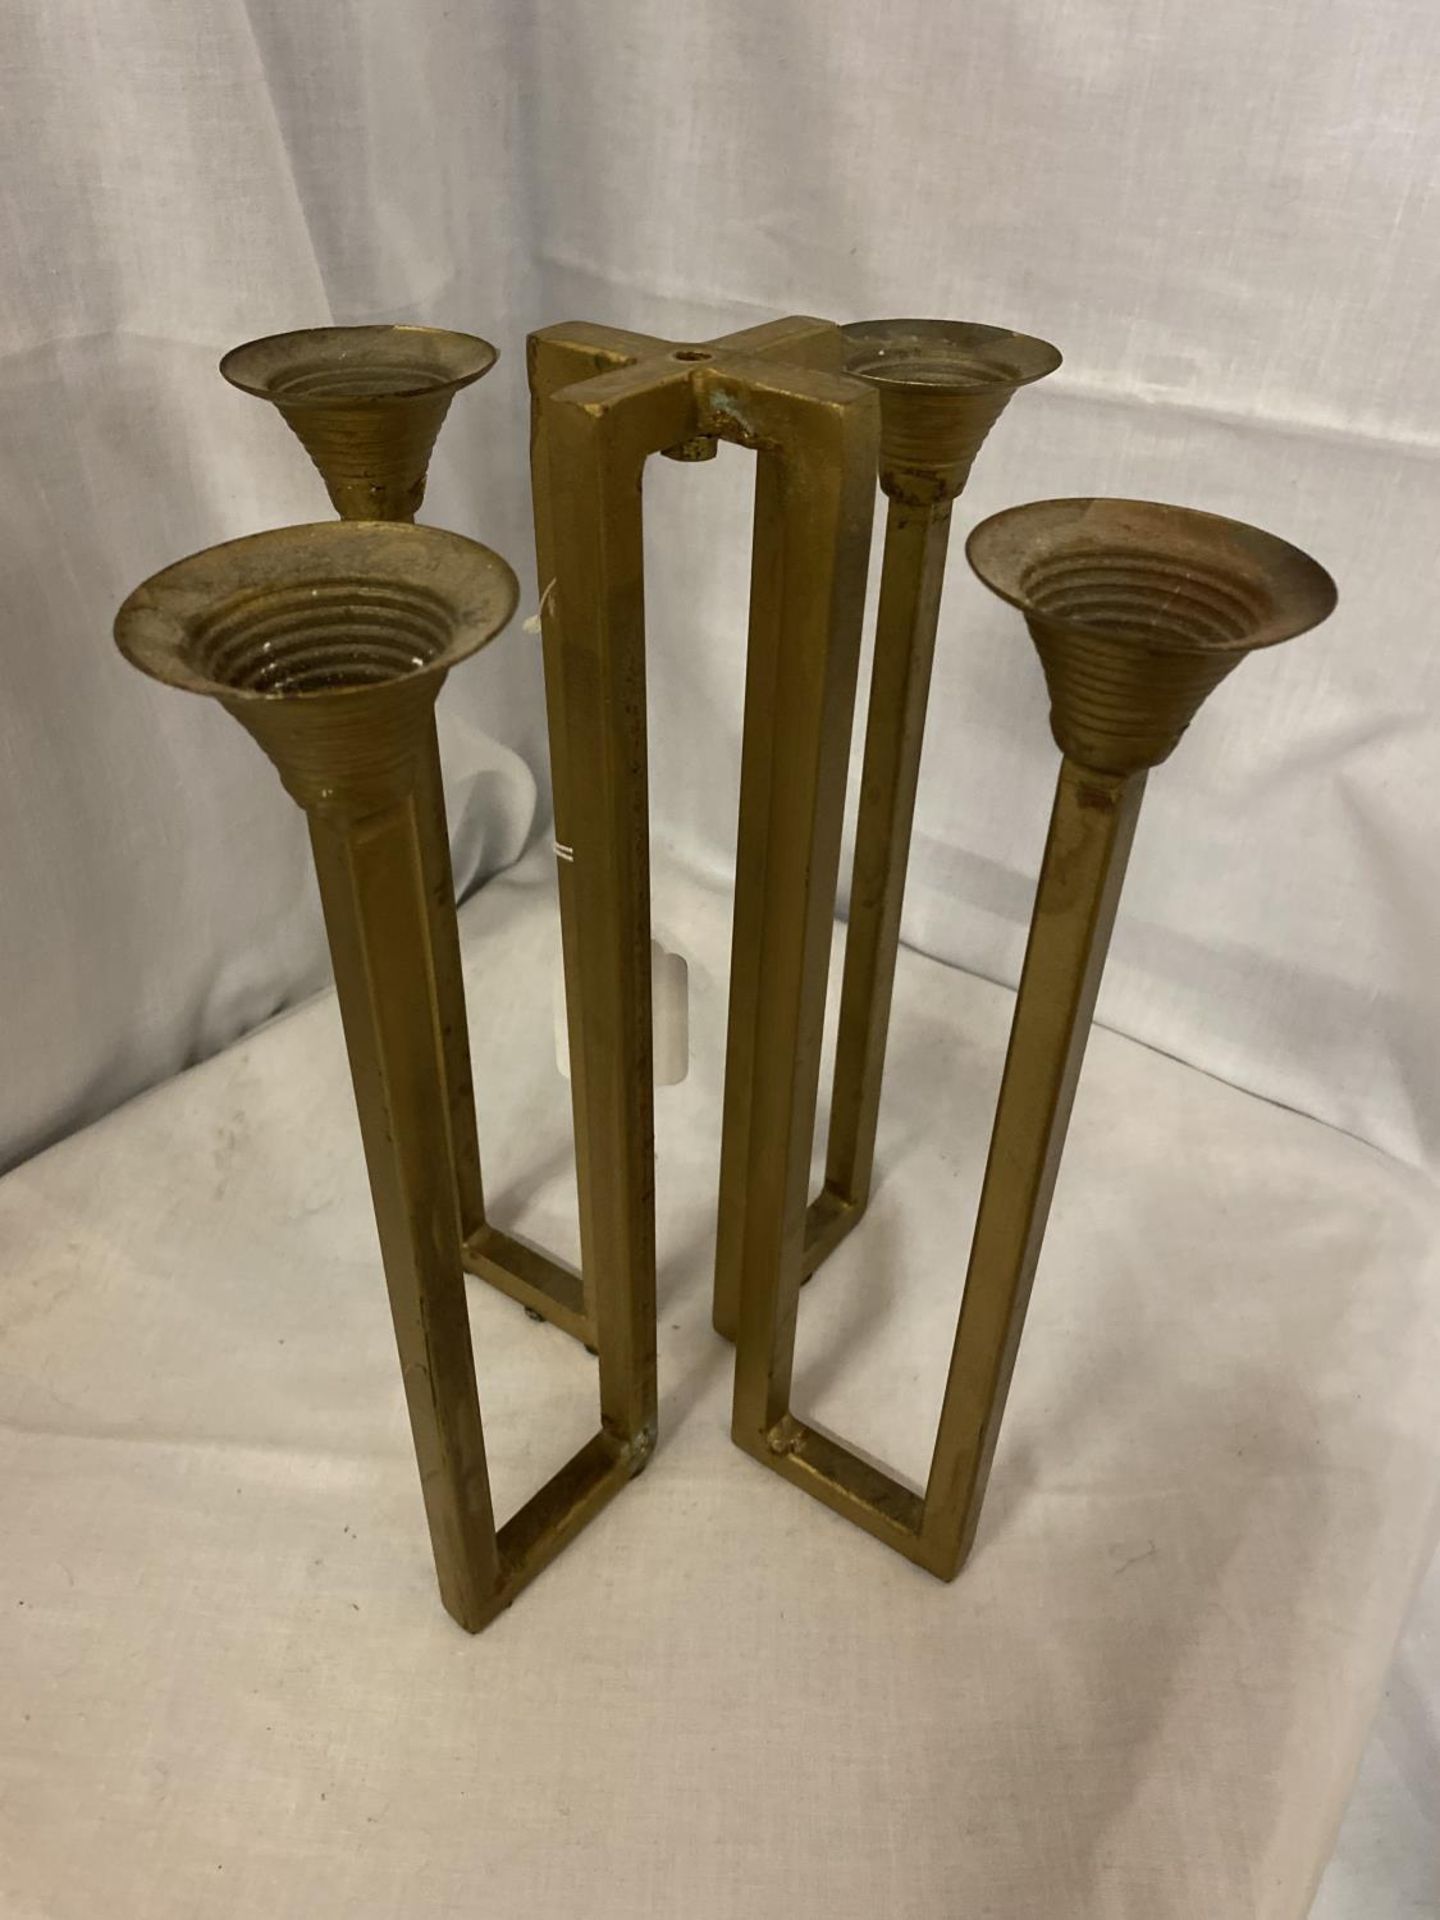 A BRASS GOTHIC STYLE FOUR BRANCH CANDLESTICK